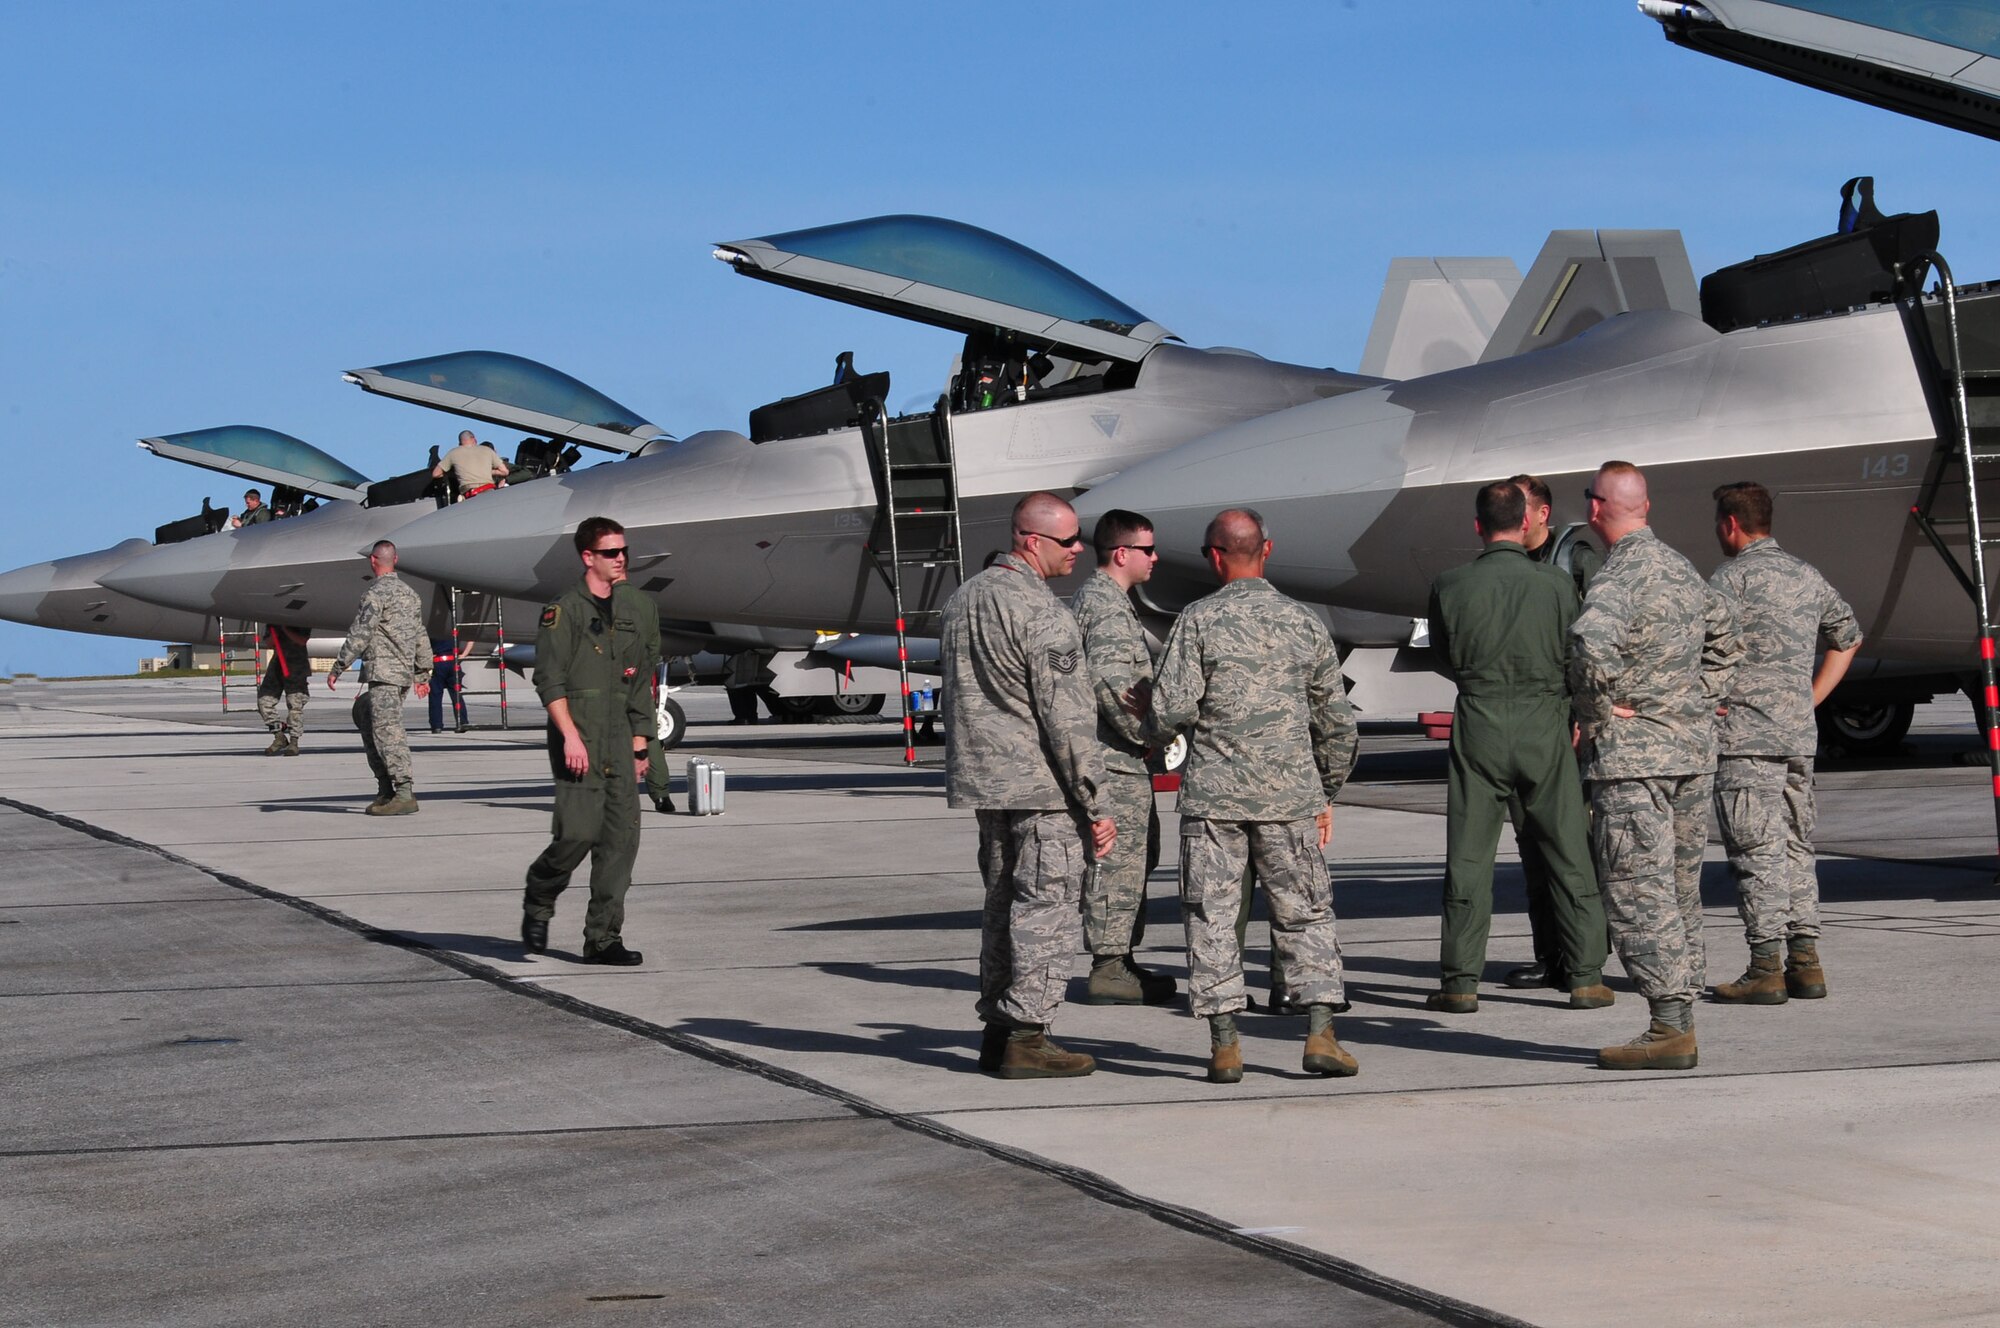 Members of the 36th Wing welcome the crew and pilots of F-22 Raptors to Andersen Air Force Base, Guam, Jan. 13. 2010. The Raptors are assigned to the 90th Fighter Squadron at Elmendorf AFB, Alaska, and are forward deployed to support the Theater Security Packages in the Pacific region.  (U.S. Air Force photo/Airman 1st Class Julian North)